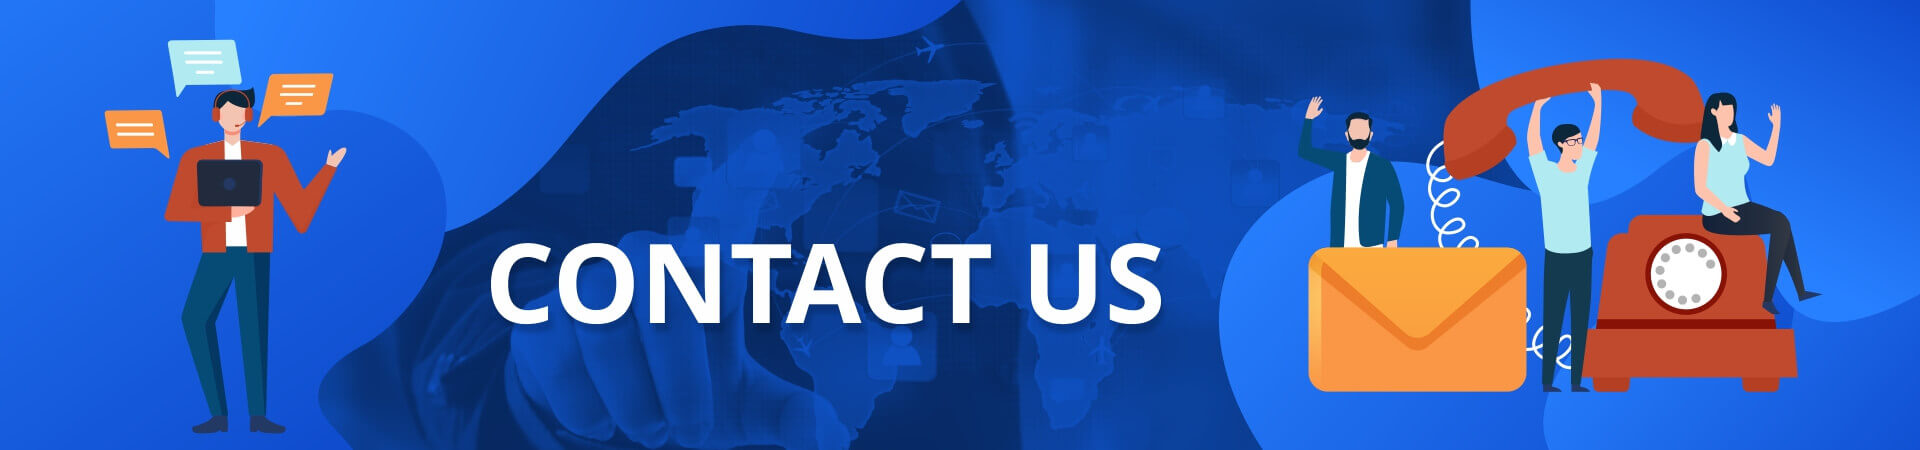 Contact us| Pyramid eServices